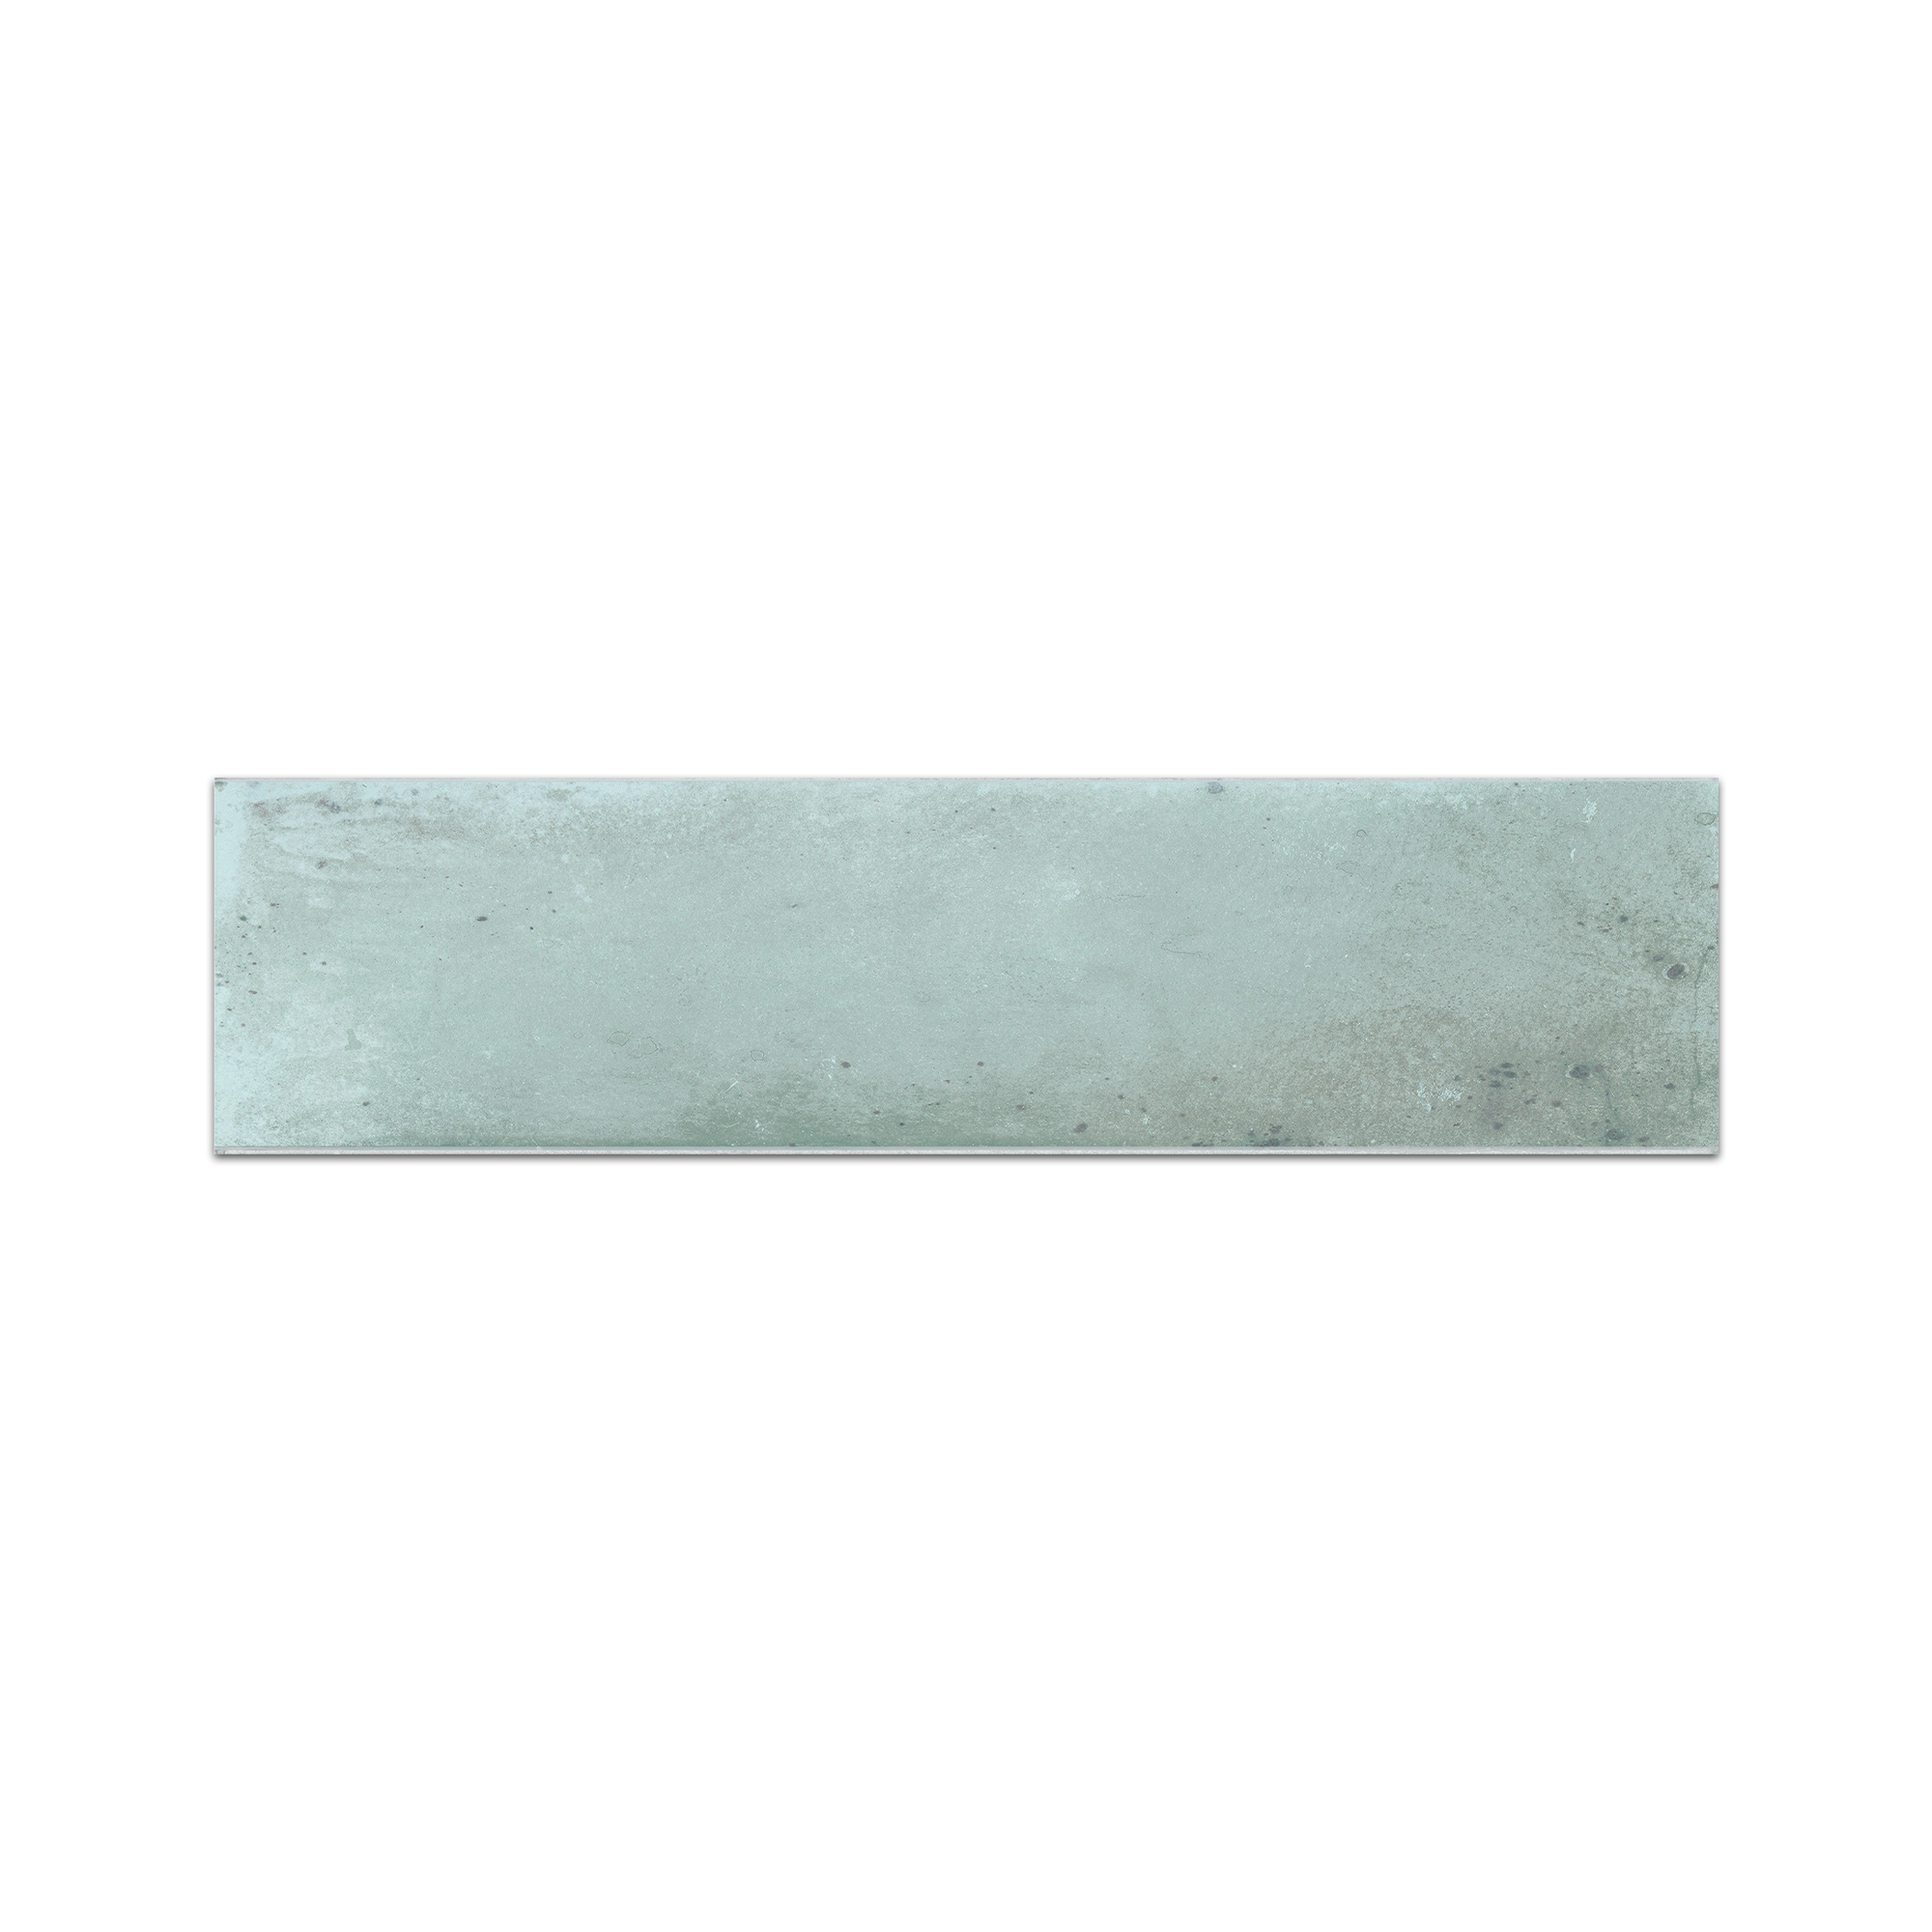 Elon Timeless Green Porcelain Rectangle Wall Tile 3x12x0.3125 Glossy MP732 Surface Group International Product